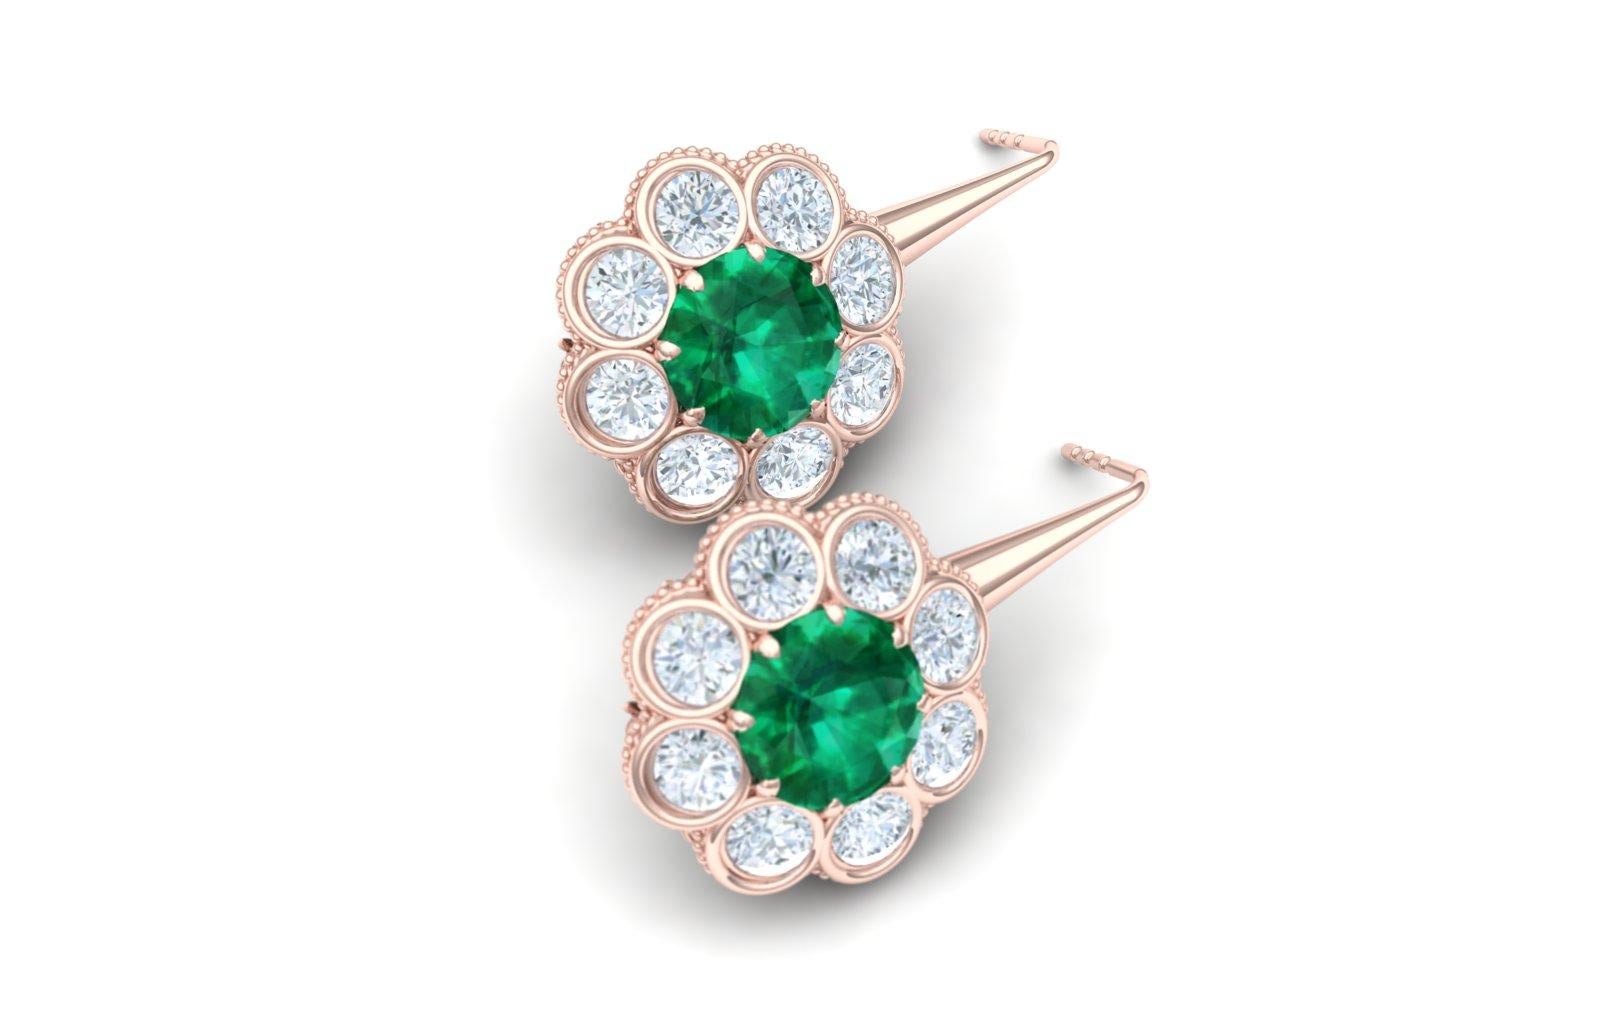 These classically inspired emerald and diamond earrings are perfect to wear daily or dress up. The center of each earring is apprx. .50 carat round emerald set with .30 ctw apprx. of white round brilliant diamonds. The diamonds have a color and